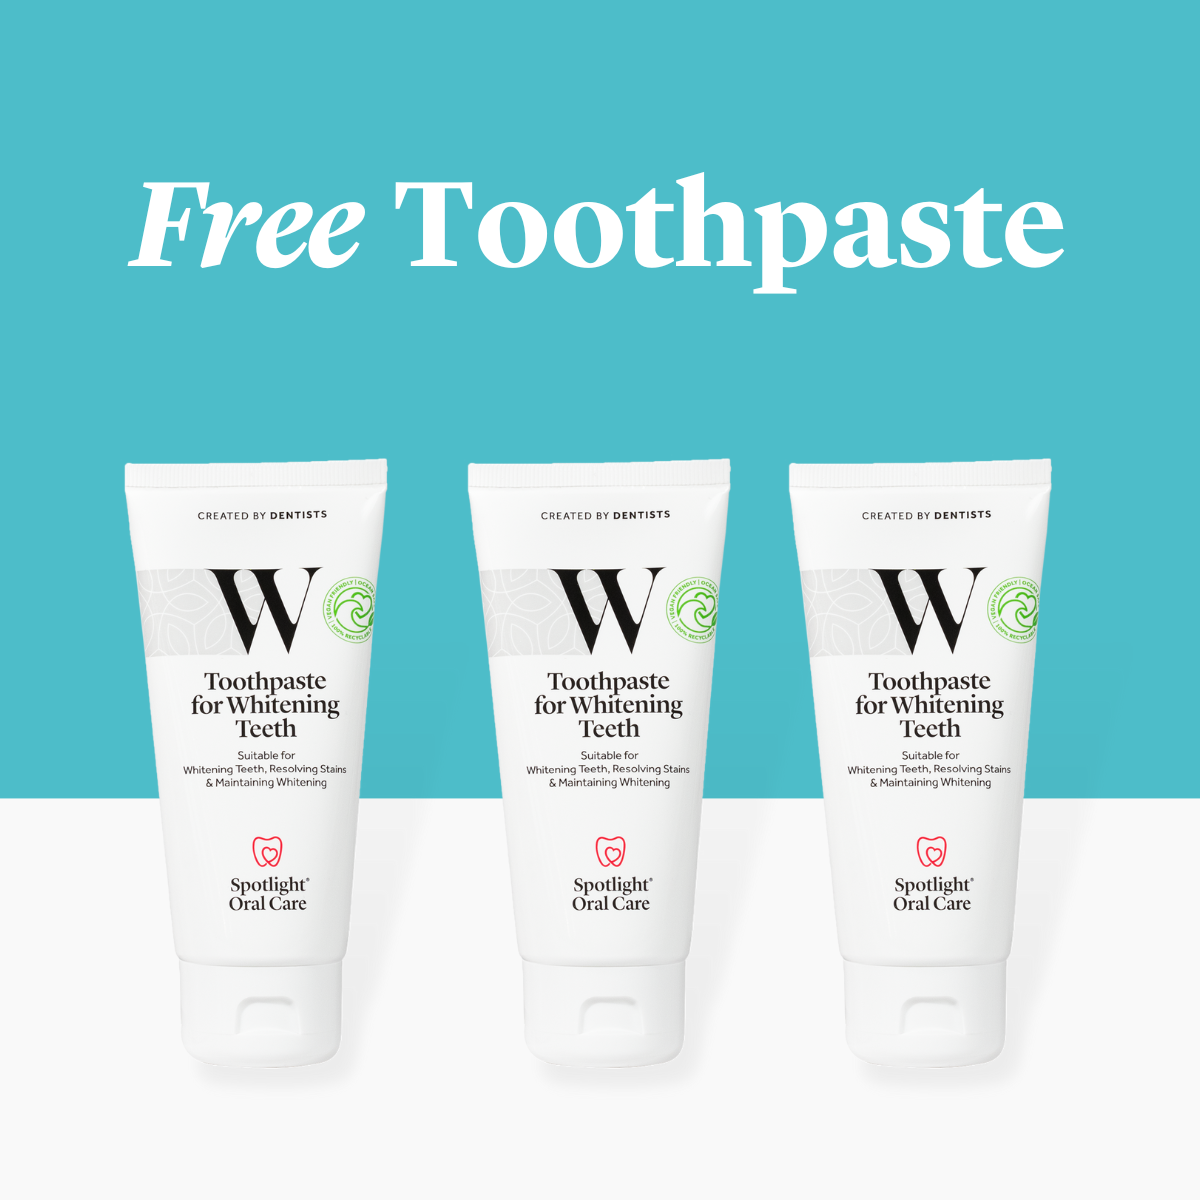 Free Toothpaste - Just Pay Delivery